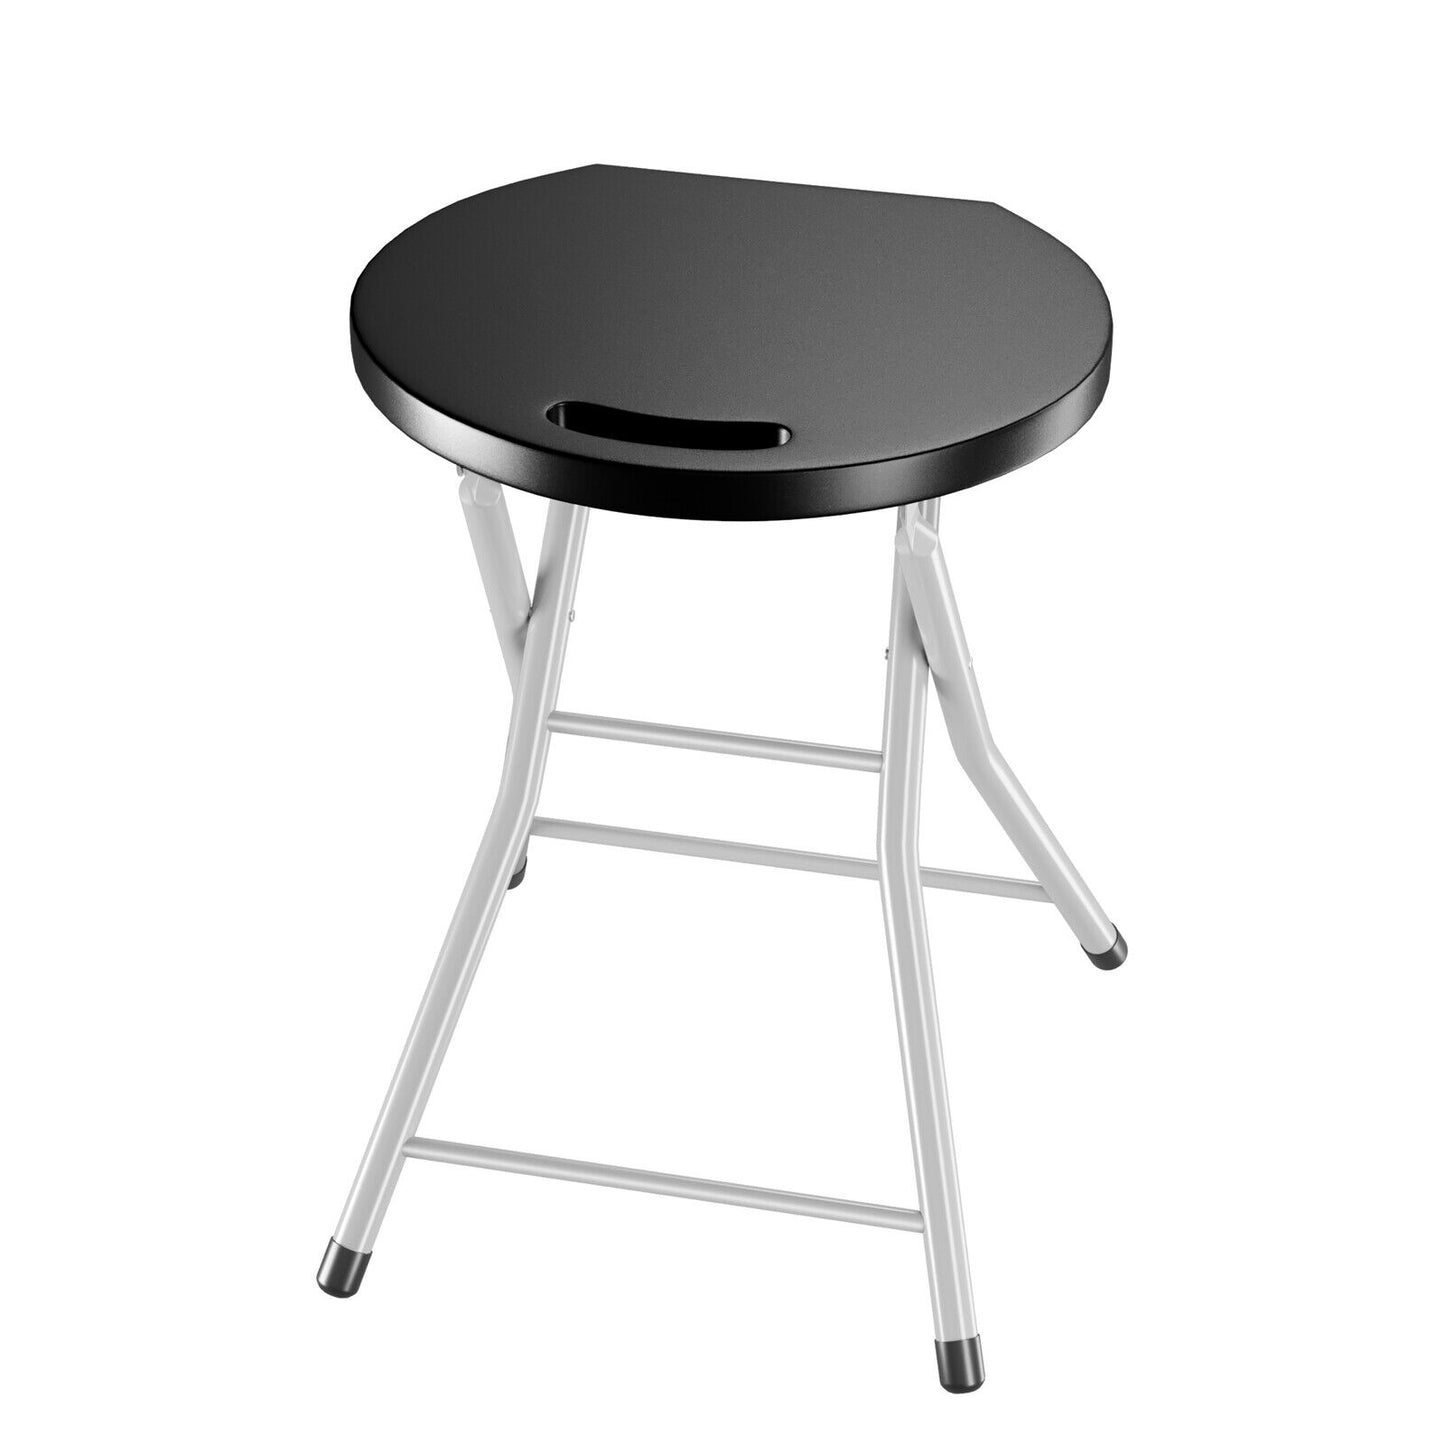 28 Inch Portable Folding Stools with 330lbs Limited Sturdy Frame